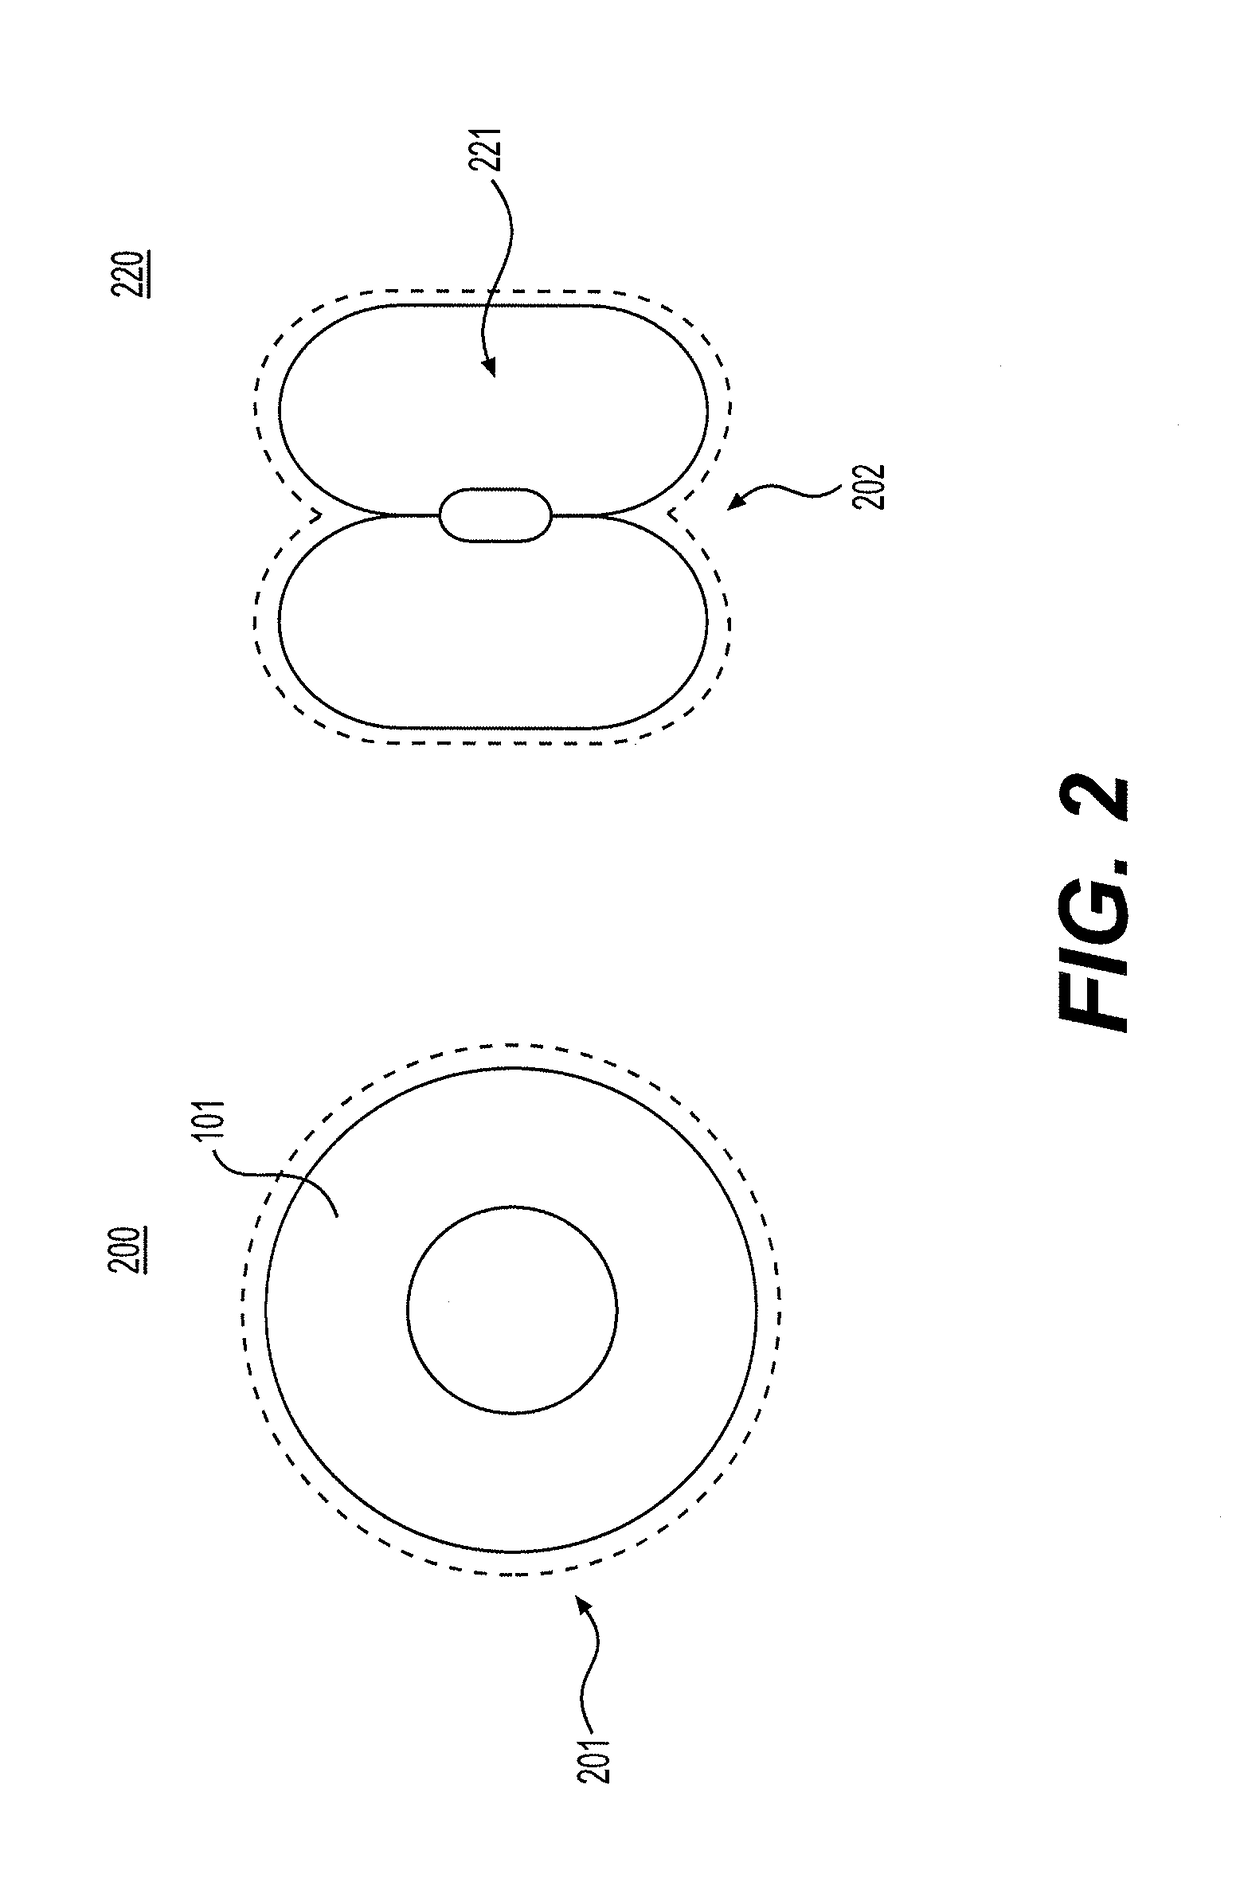 Advanced applicator systems and methods